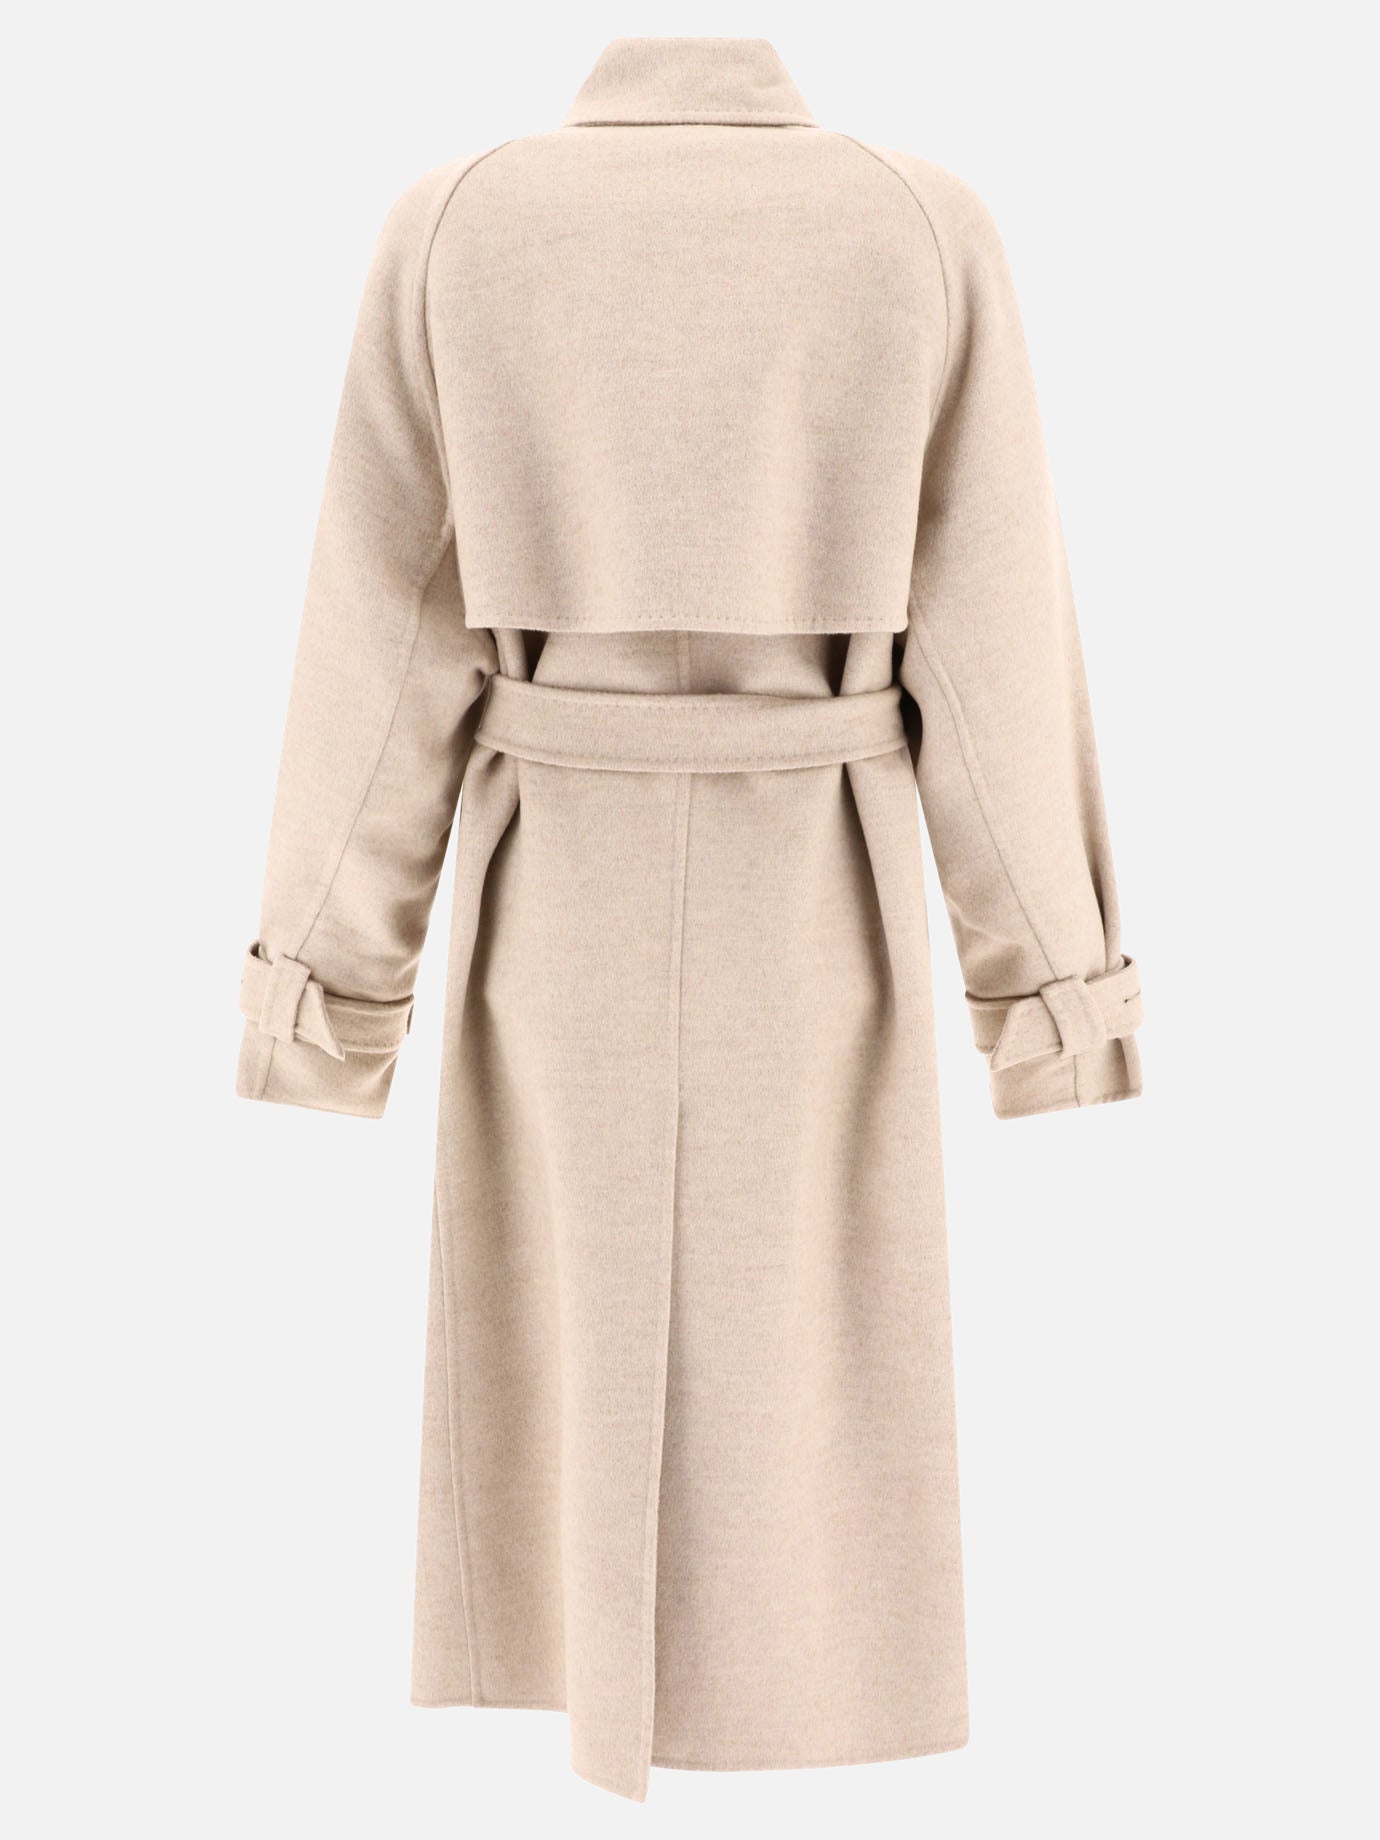 "Falco" cashmere trench coat